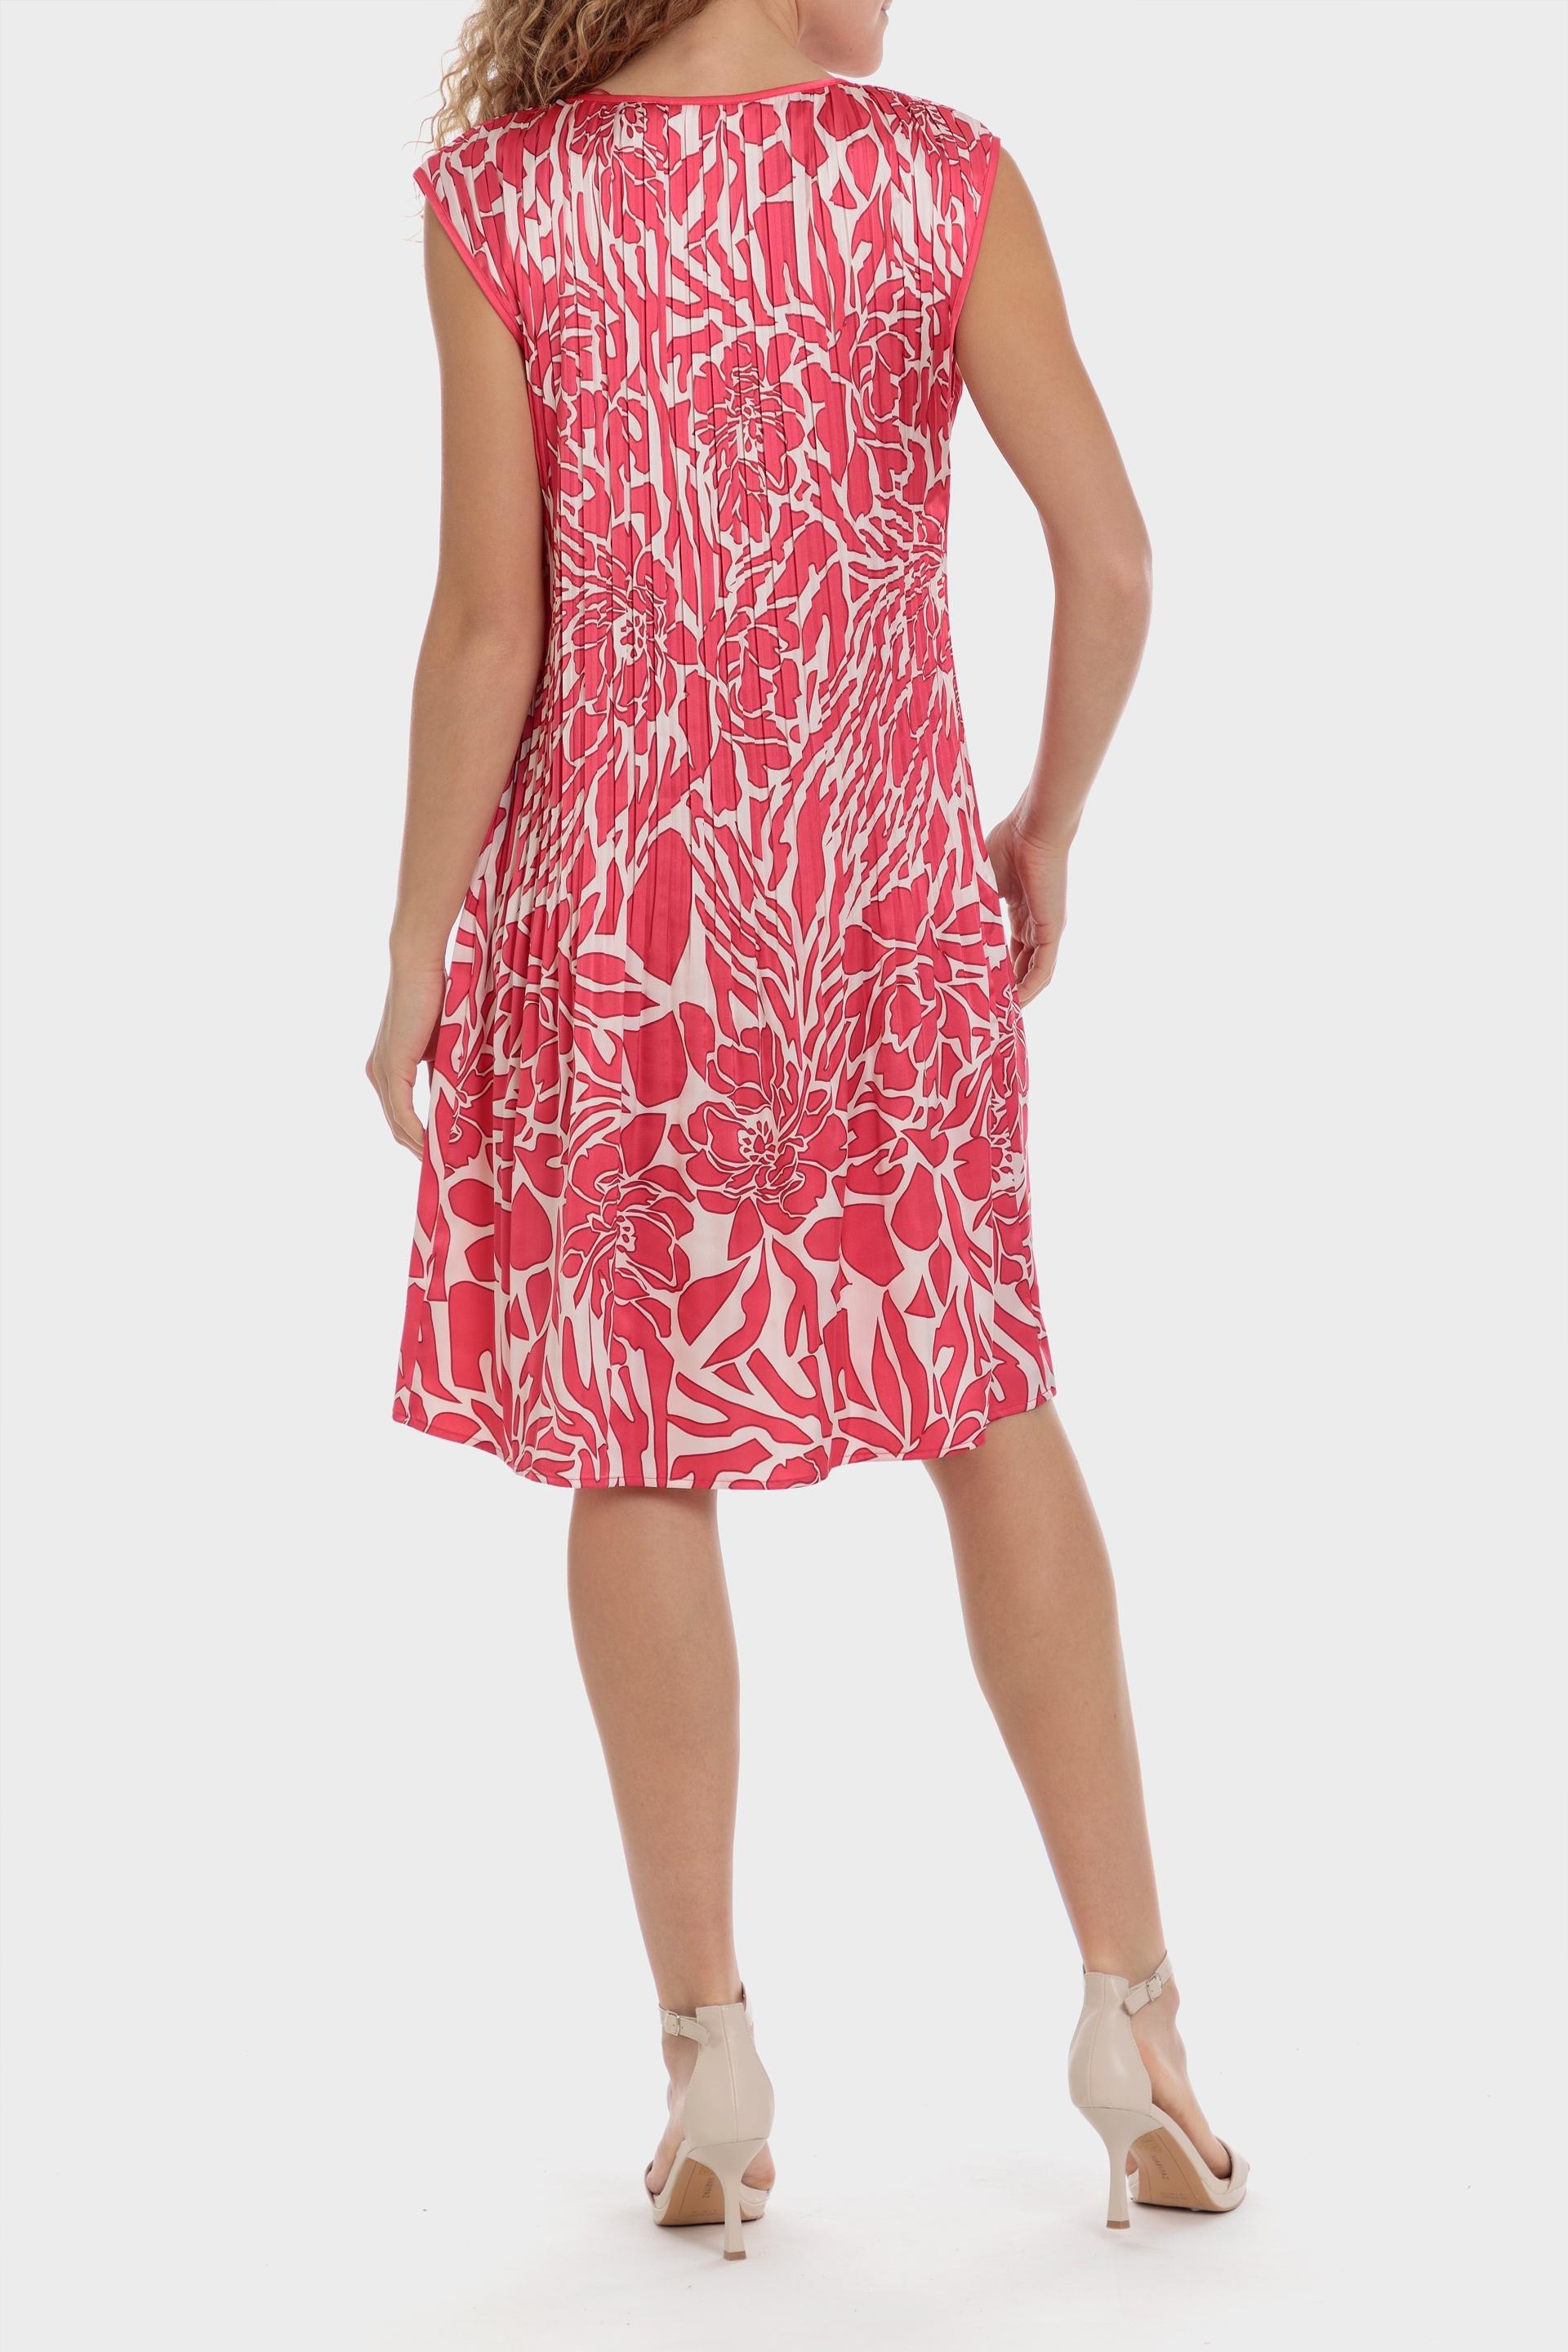 Punt Roma - Pink Pleated Printed Dress